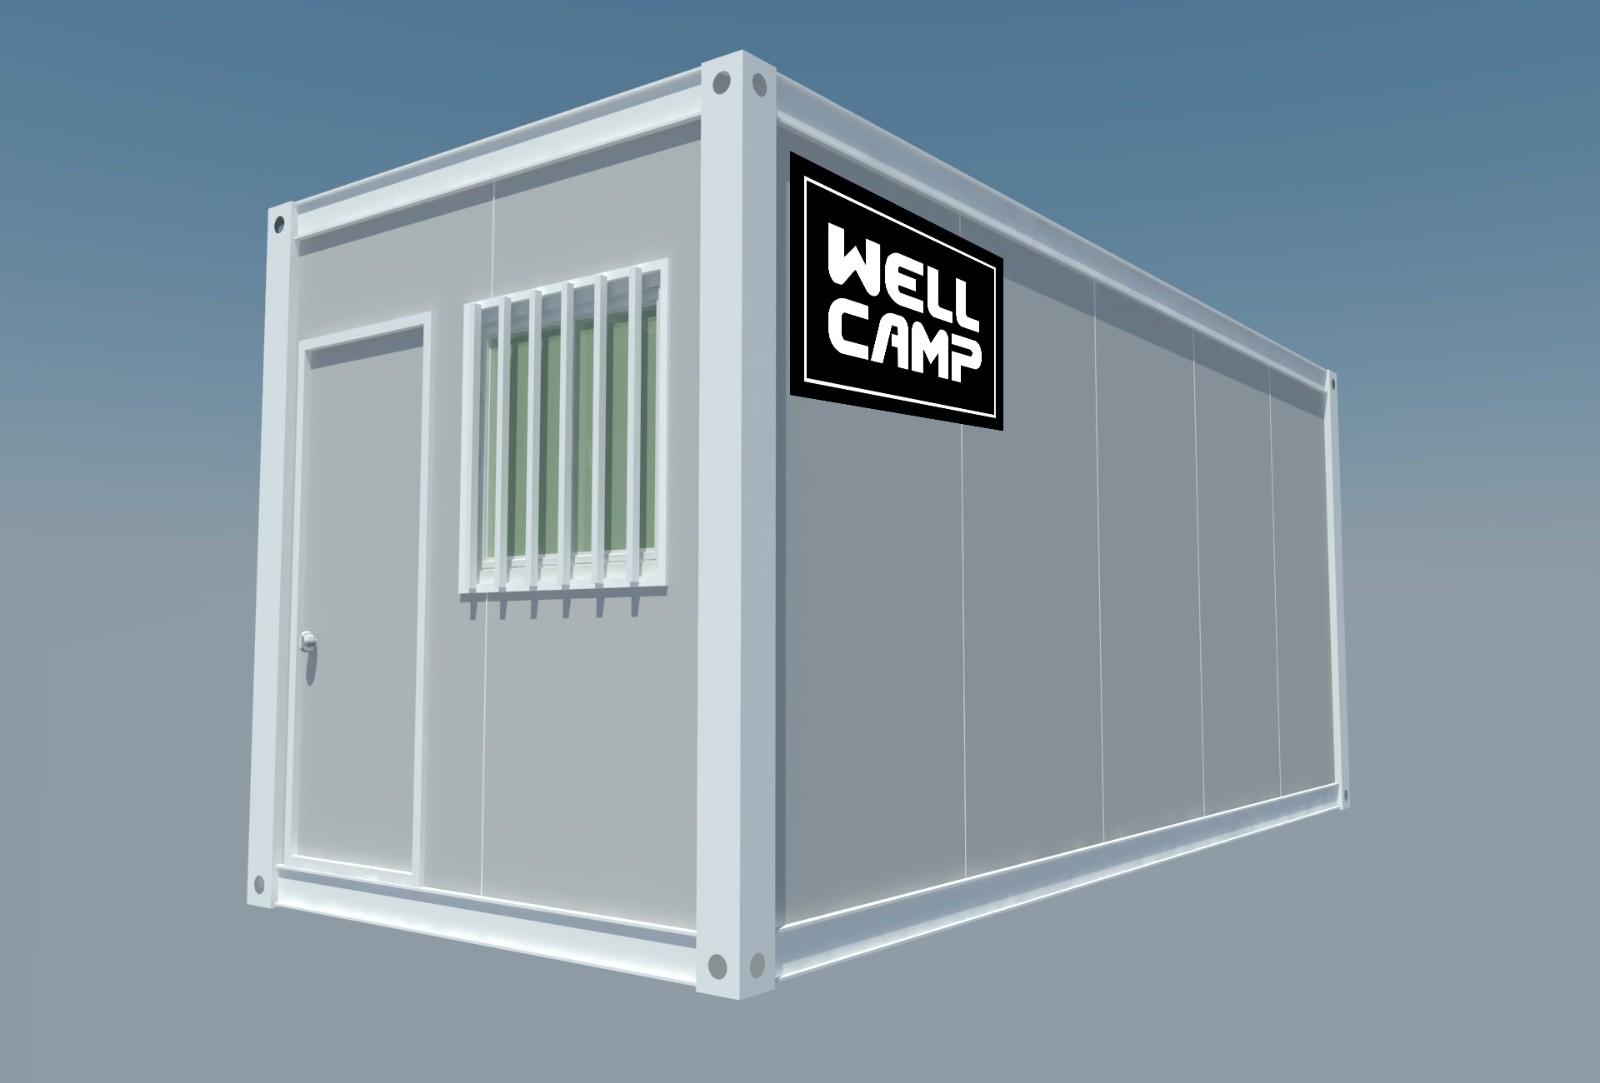 toilets affordable glass flat pack containers WELLCAMP Brand